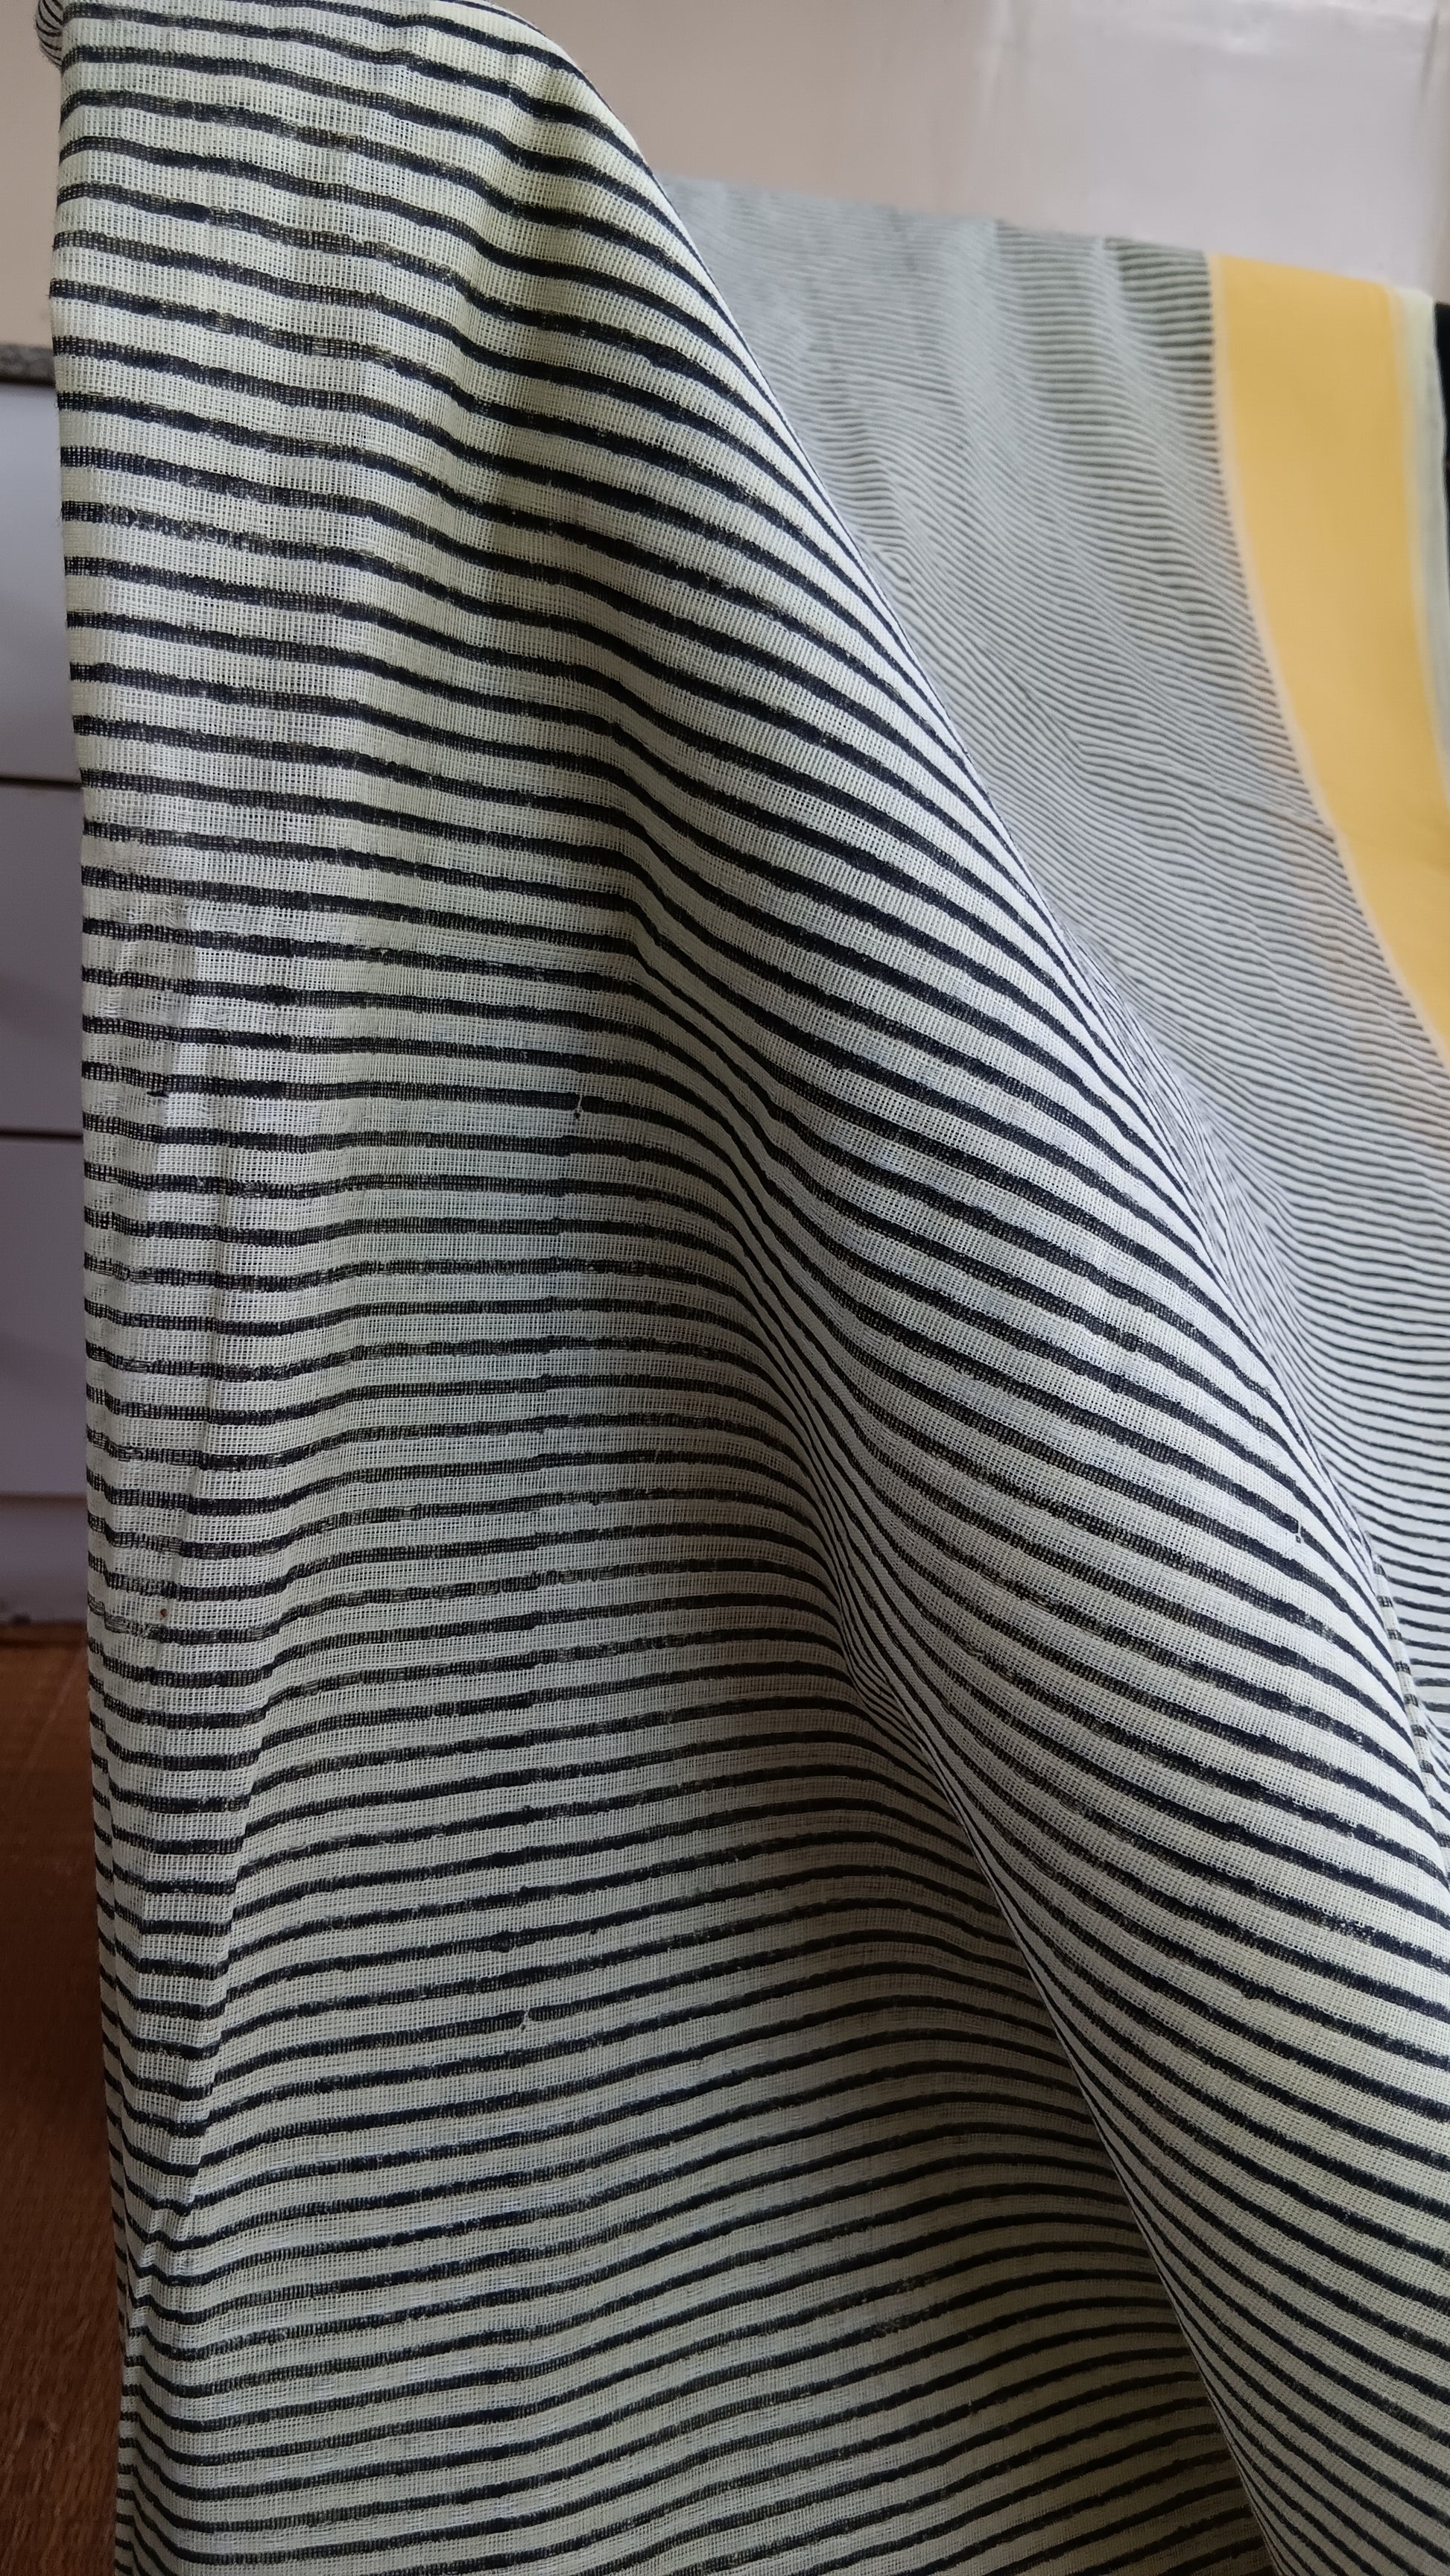 close up view of the stripes block printed on the body of a daily wear grey cotton saree with yellow border